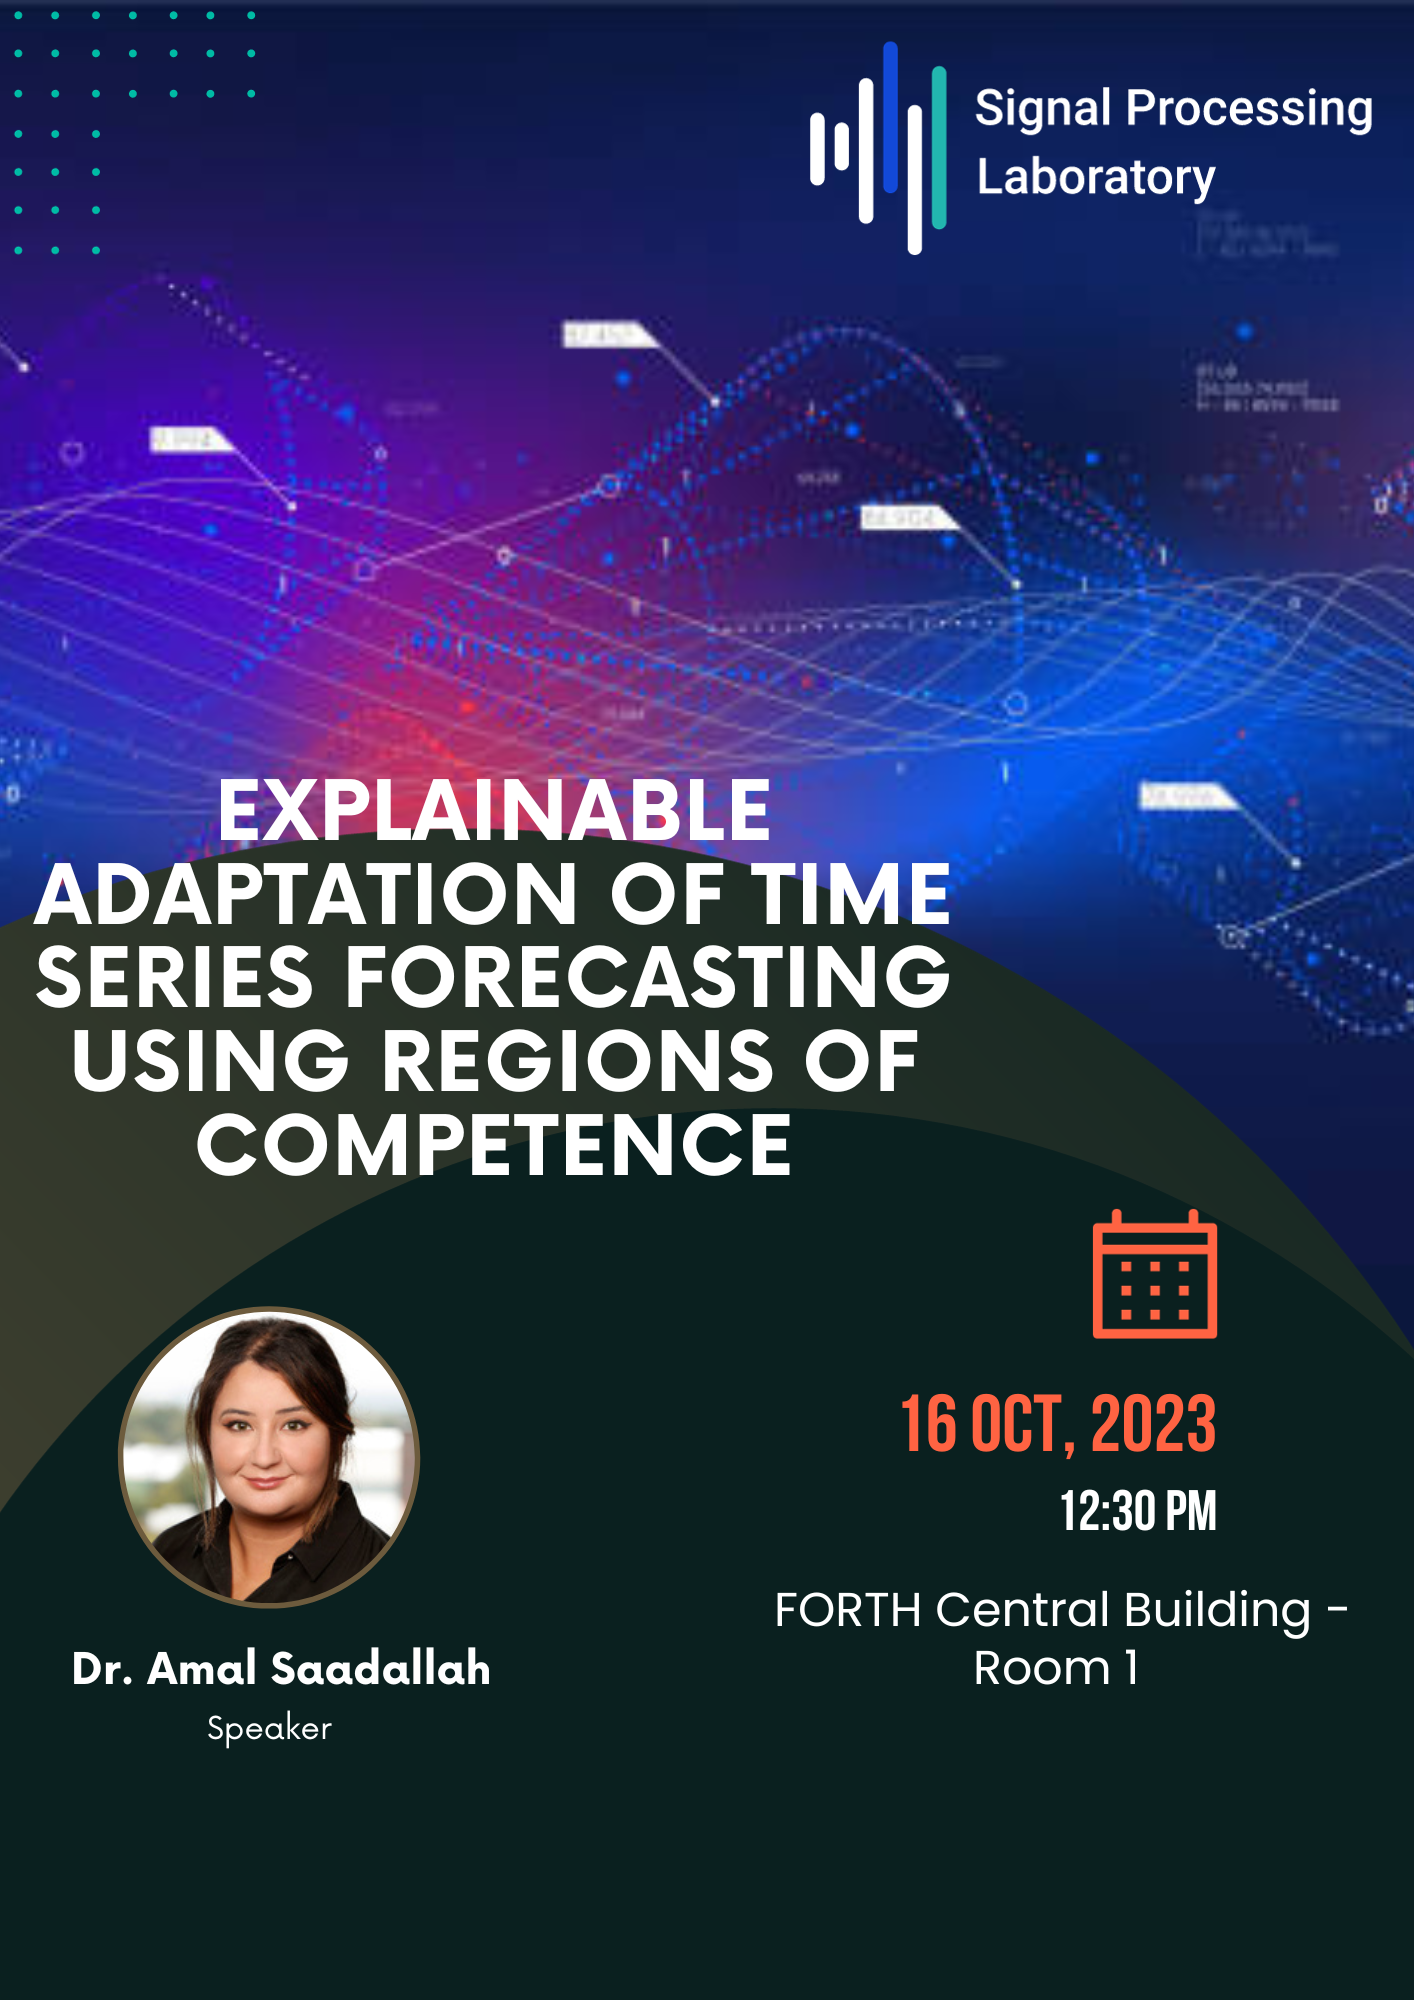  Explainable Adaptation of Time Series Forecasting using Regions of Competence